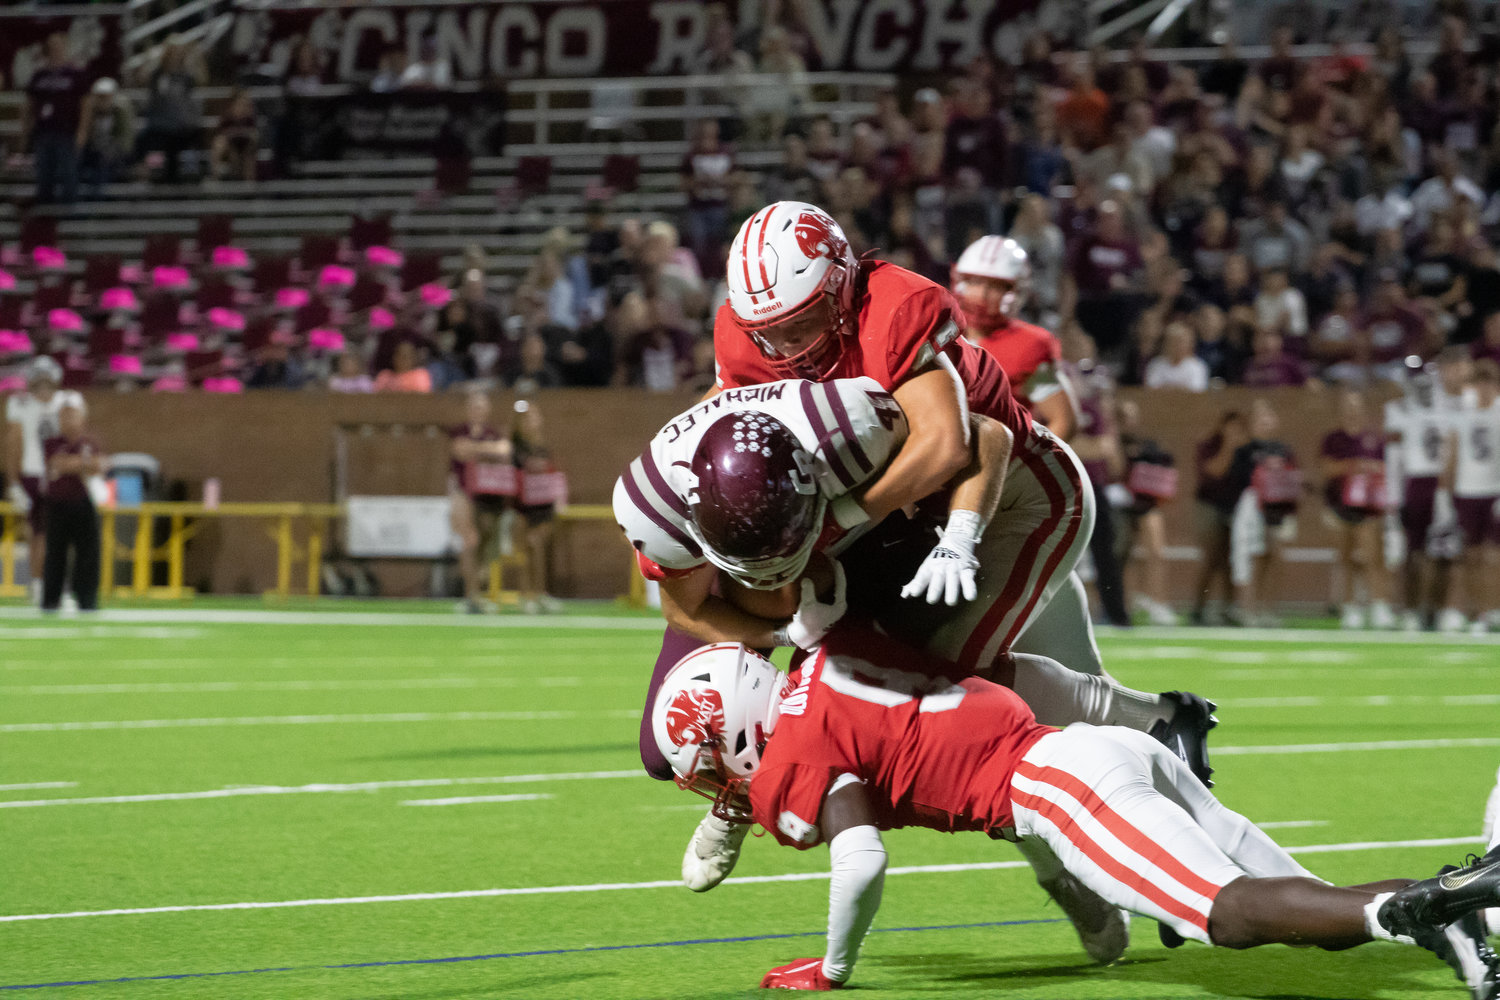 Katy players bring down a Cinco Ranch ballcarrier during Friday's game between Katy and Cinco Ranch at Rhodes Stadium.